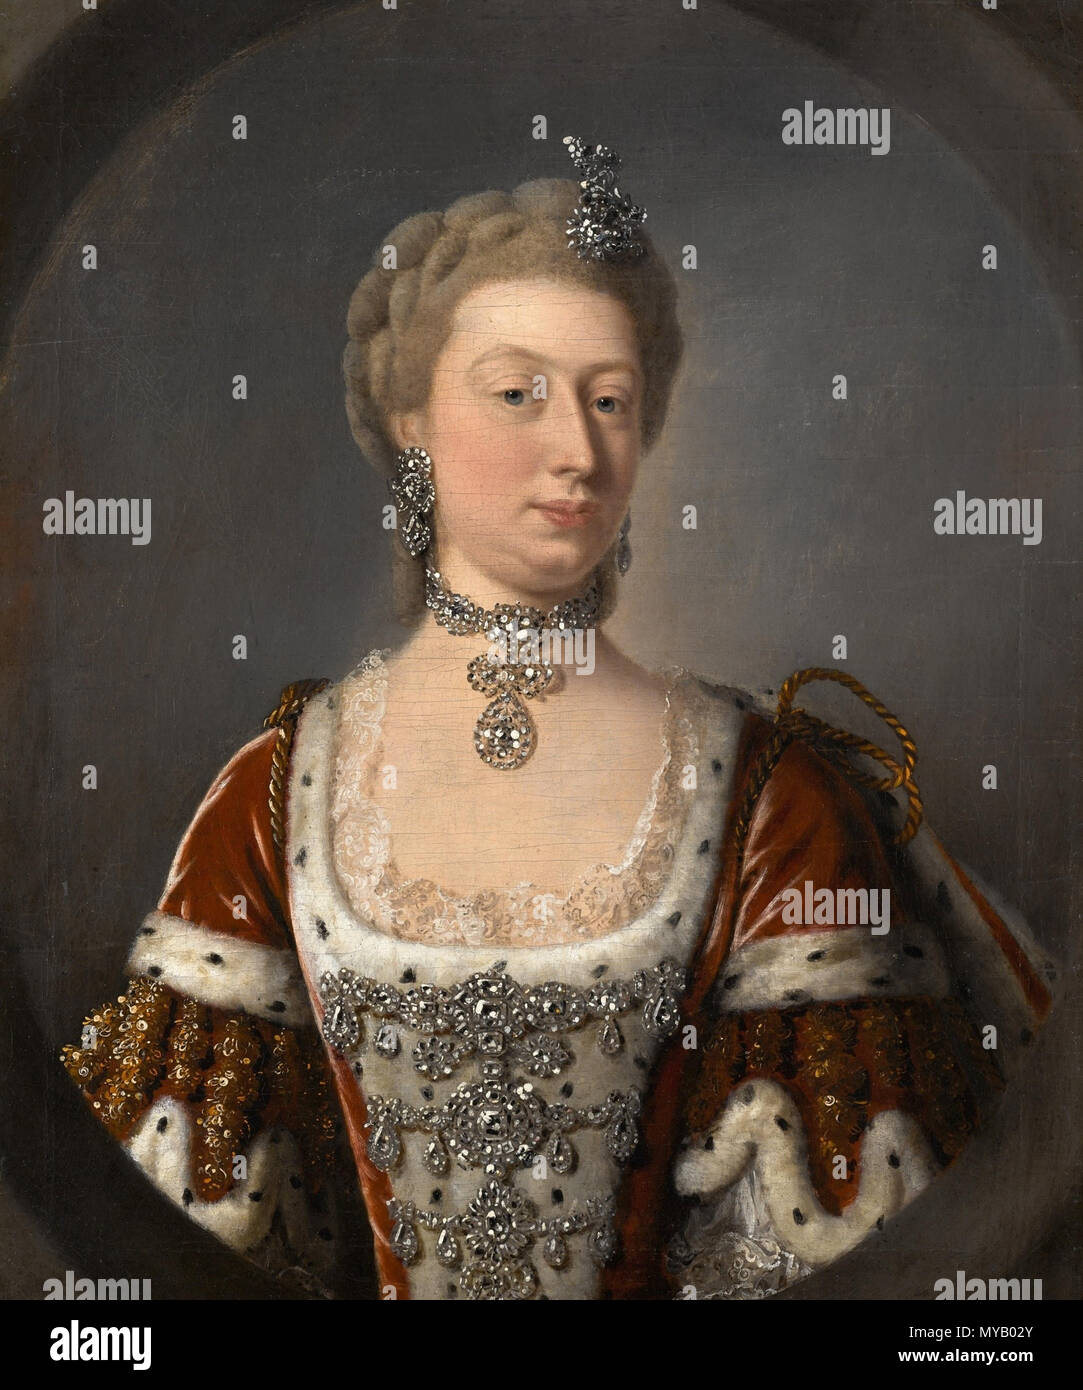 . English: Portrait of Augusta of Saxe-Gotha, Princess of Wales (1719-1772) . 18th century.   Studio of Jean-Baptiste van Loo  (1684–1745)     Description French painter  Date of birth/death 11 January 1684 19 September 1745  Location of birth/death Aix Aix  Work location Turin, Paris, London  Authority control  : Q542541 VIAF: 39647882 ISNI: 0000 0000 6661 9907 ULAN: 500023372 LCCN: nr2001048206 WGA: LOO, Jean-Baptiste van WorldCat 55 Augusta of Saxe-Gotha, Princess of Wales Stock Photo